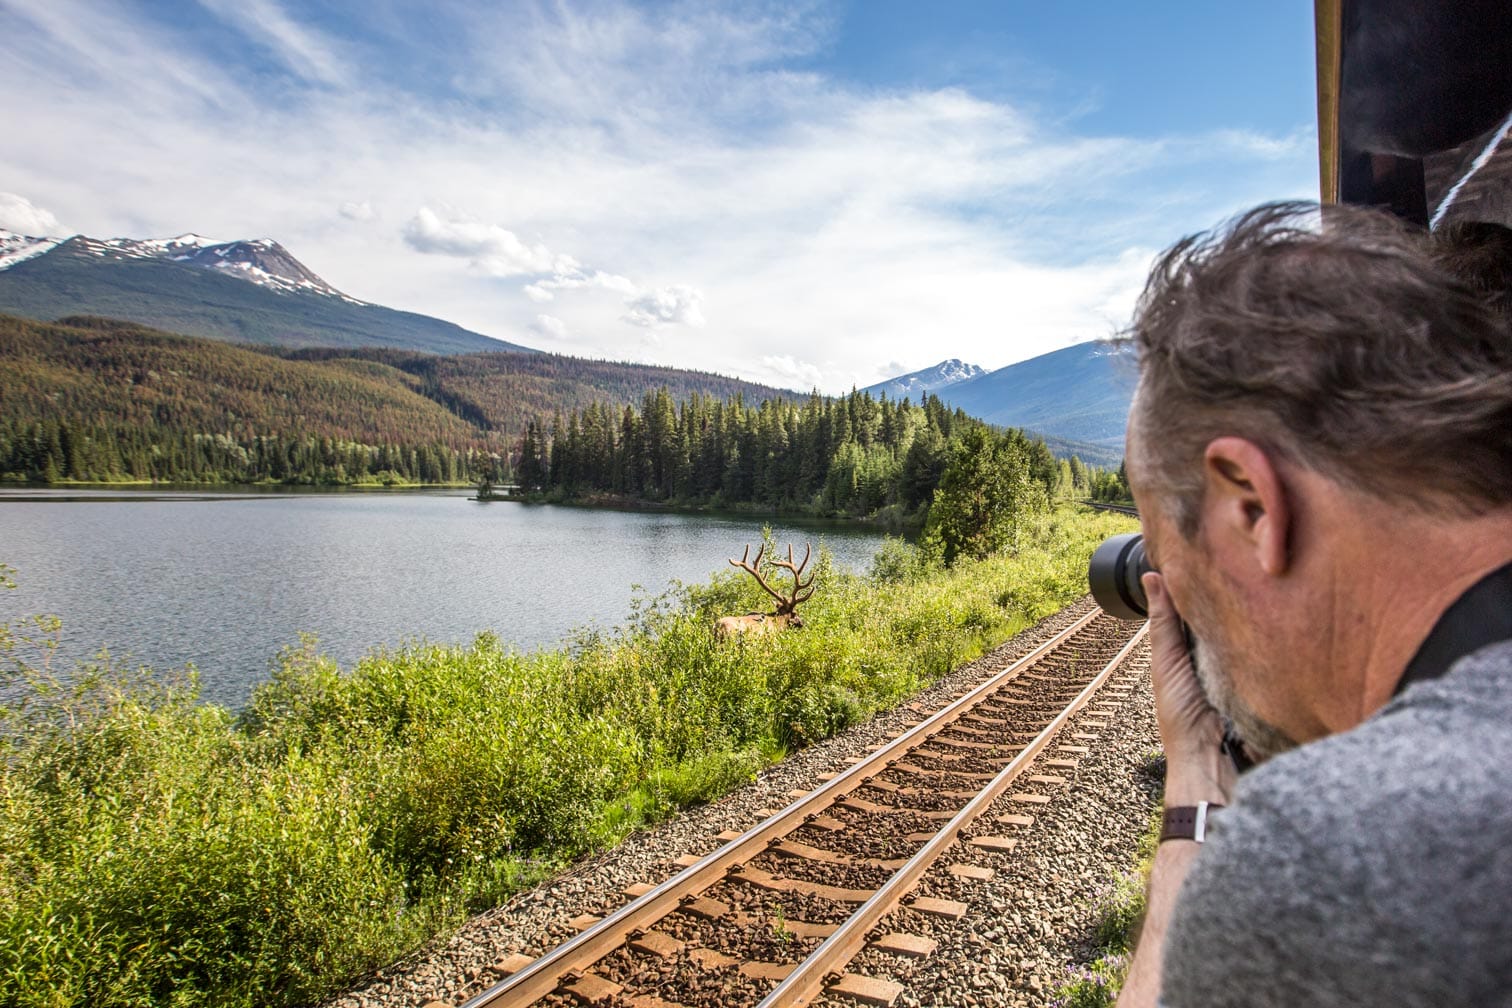 Guest taking photos while on the Rocky Mountain train